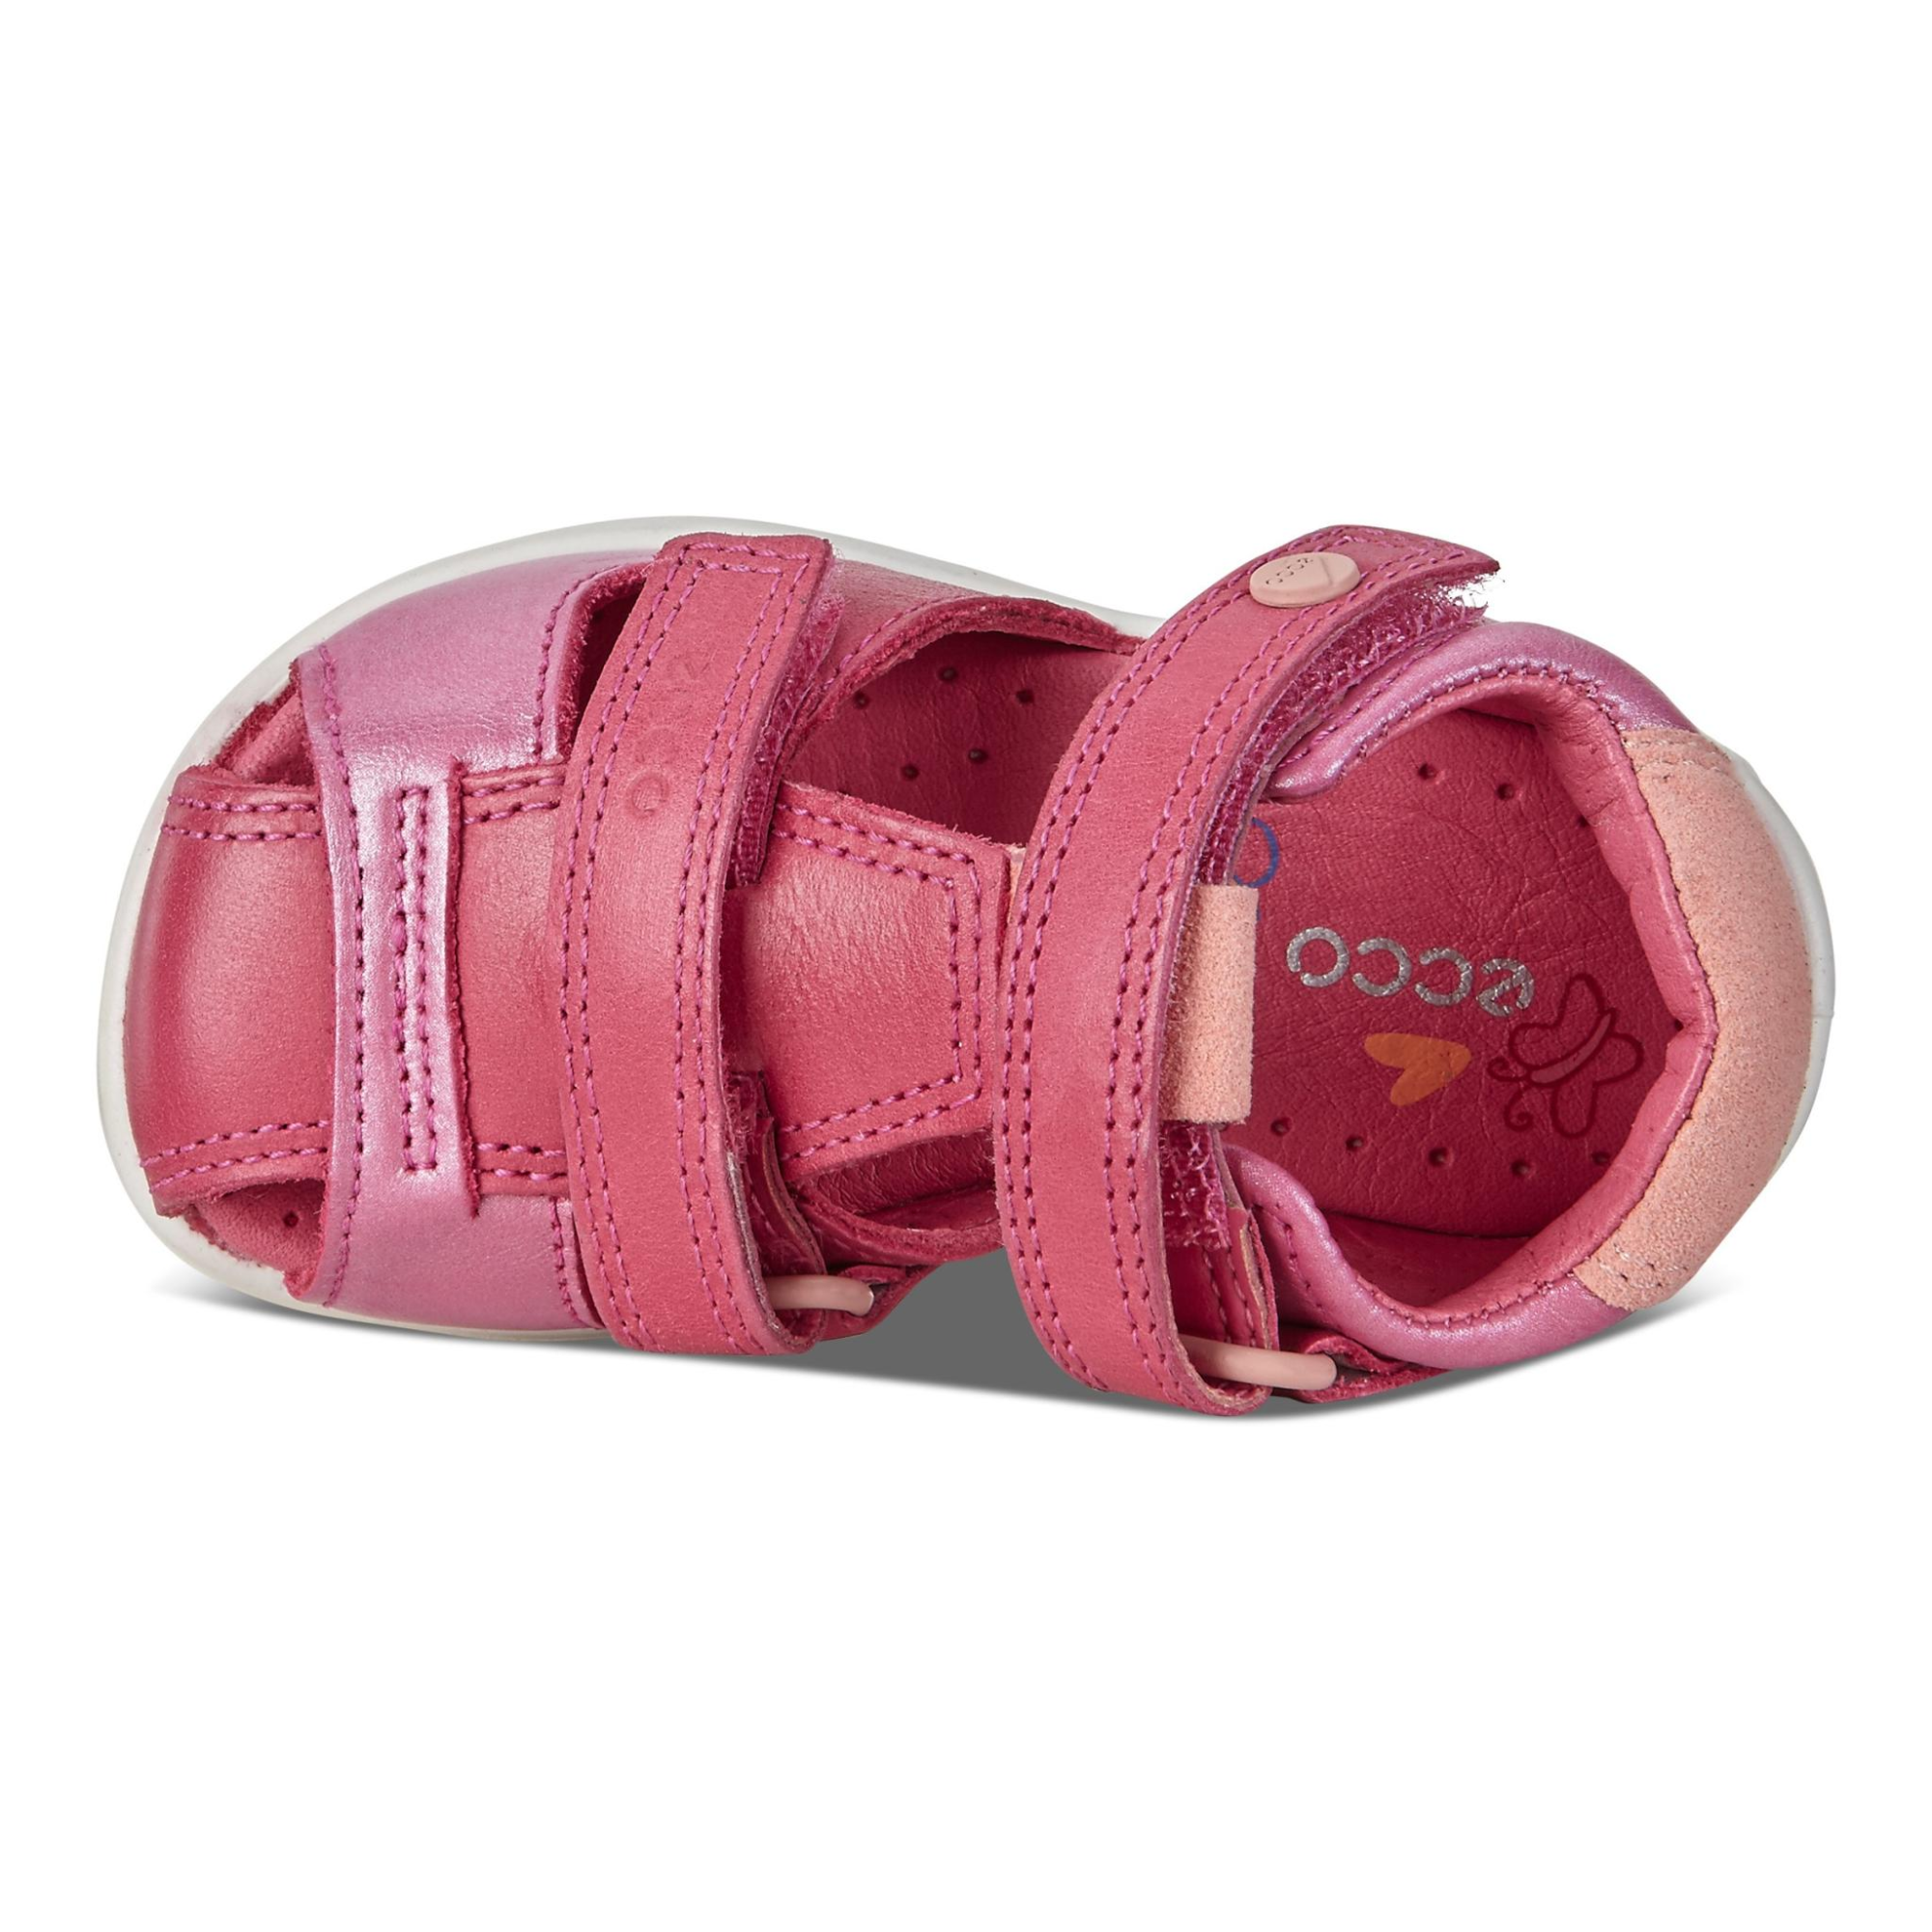 Ecco Peekaboo Sandal 24 Products - Veryk Mall - Veryk Mall, many product, quick response, safe your money!